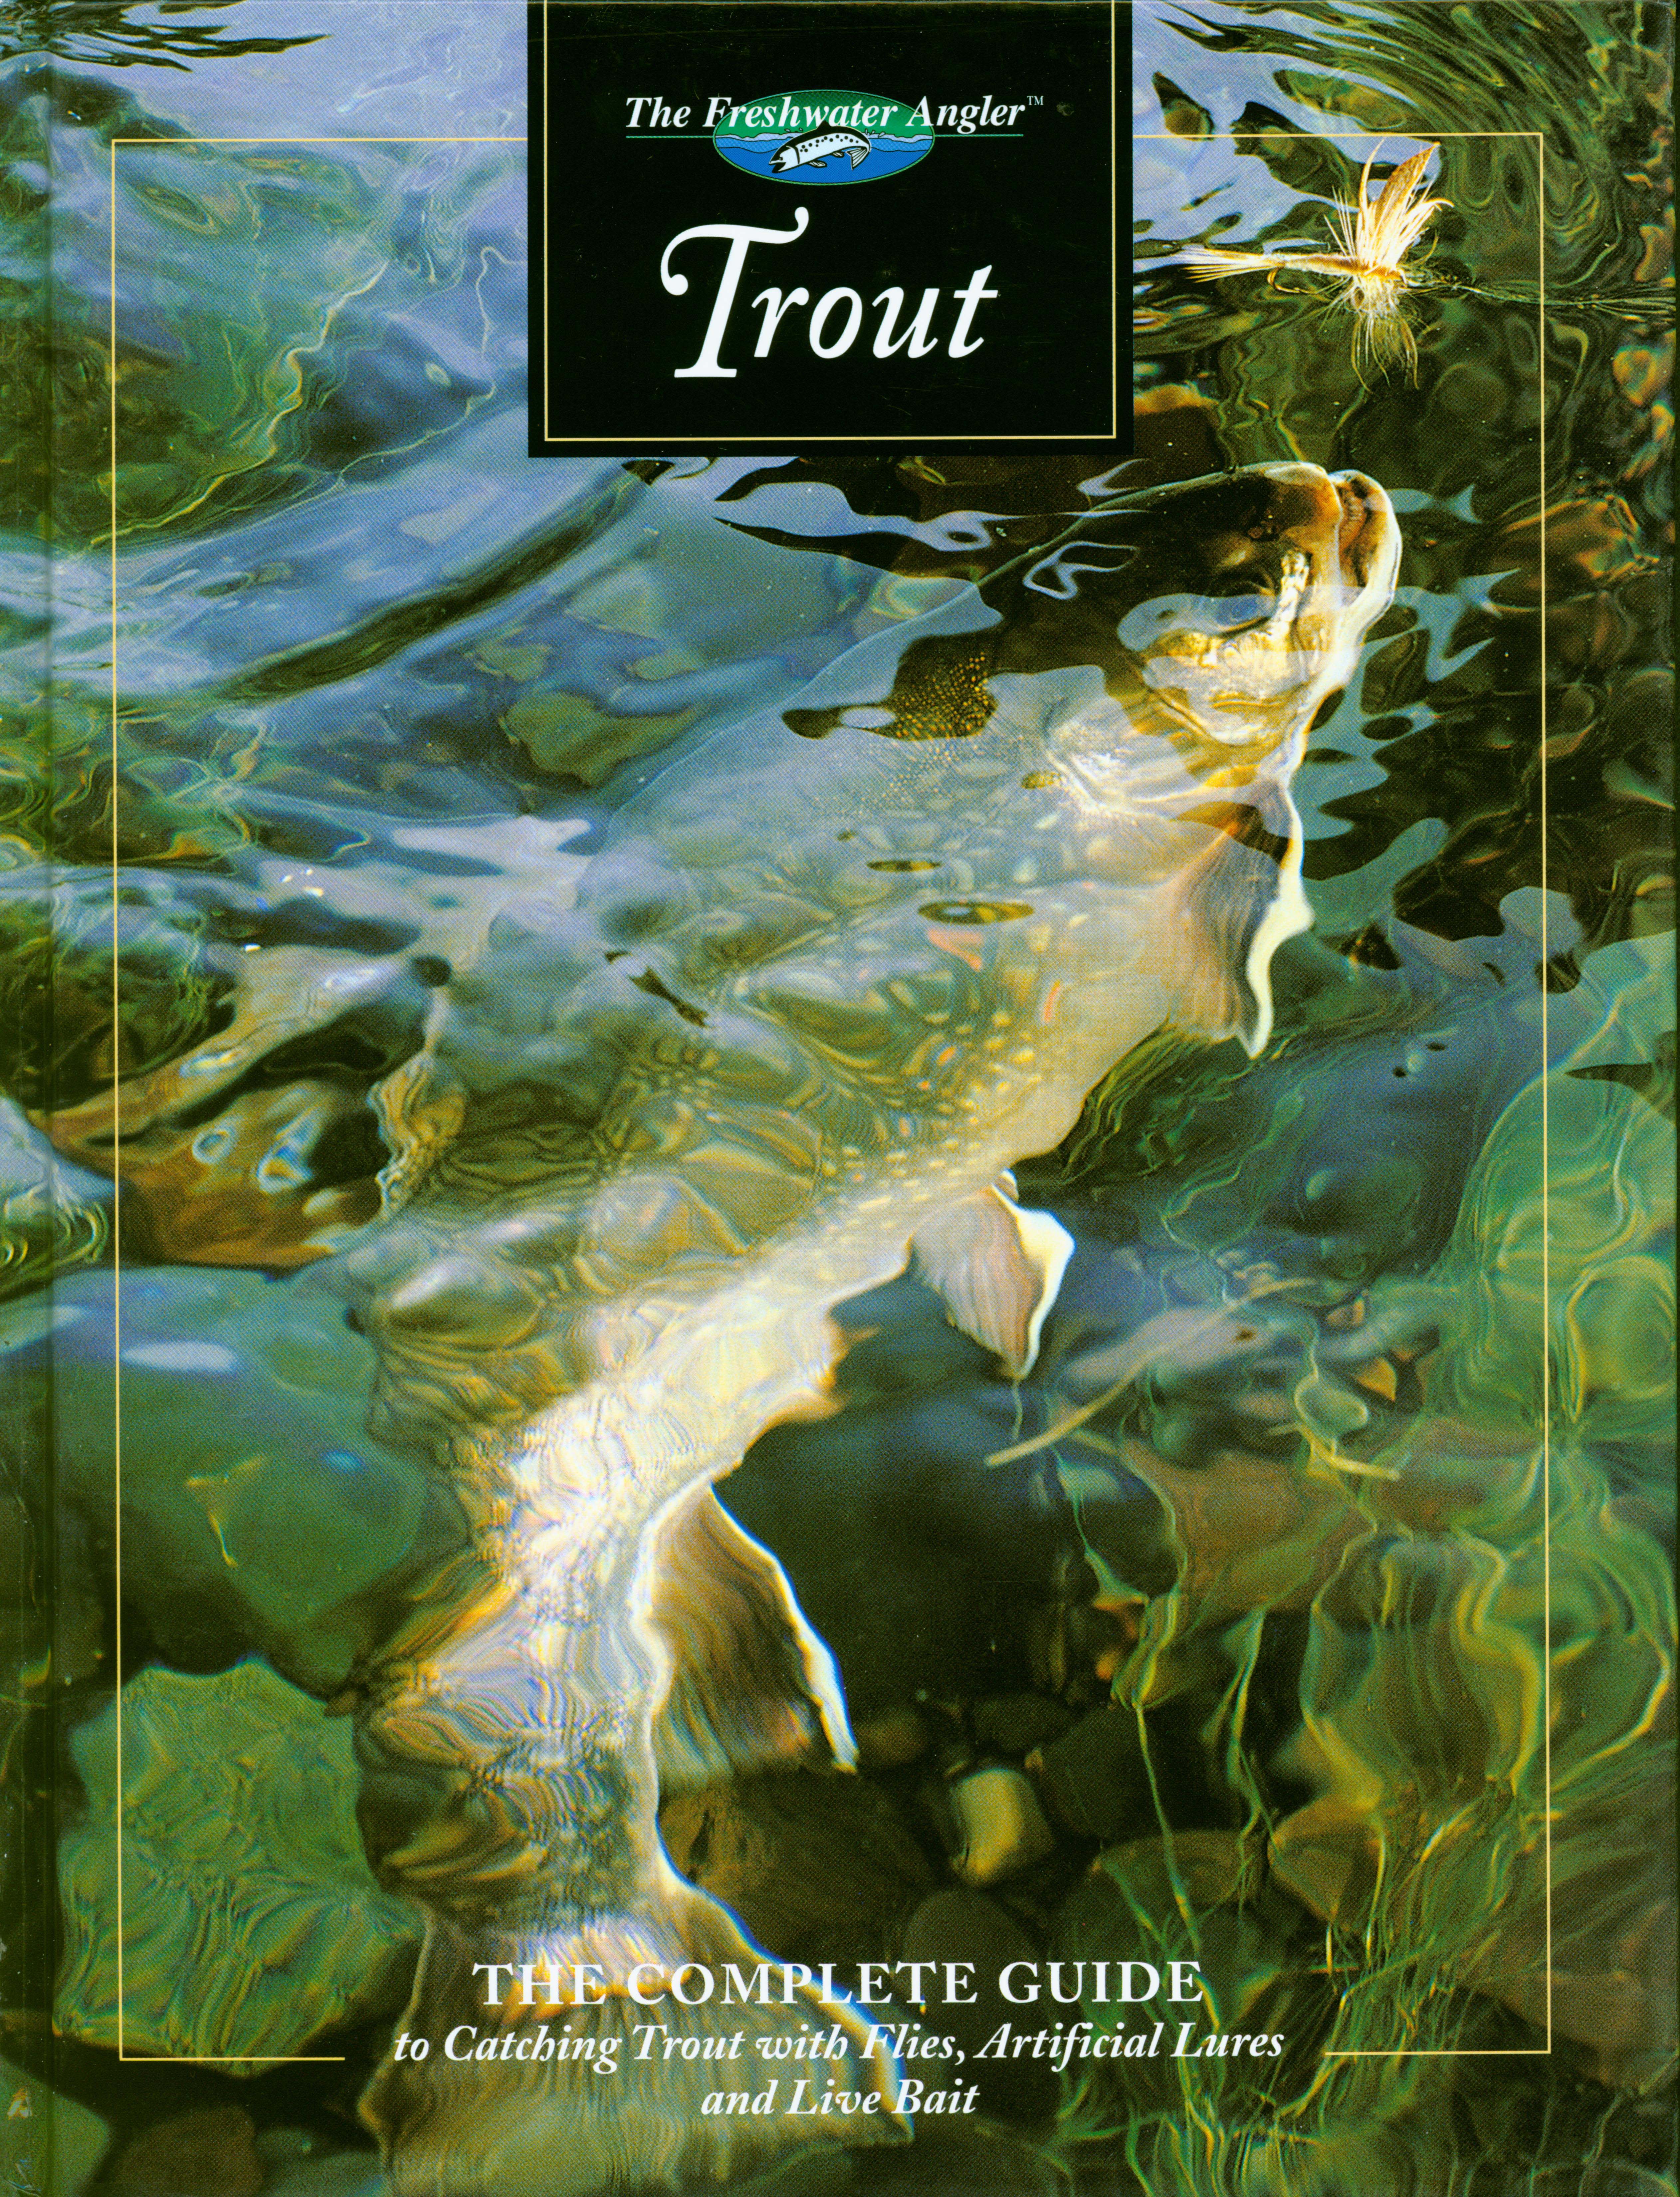 THE COMPLETE GUIDE TO CATCHING TROUT with flies, artificial lures, and live bait. 